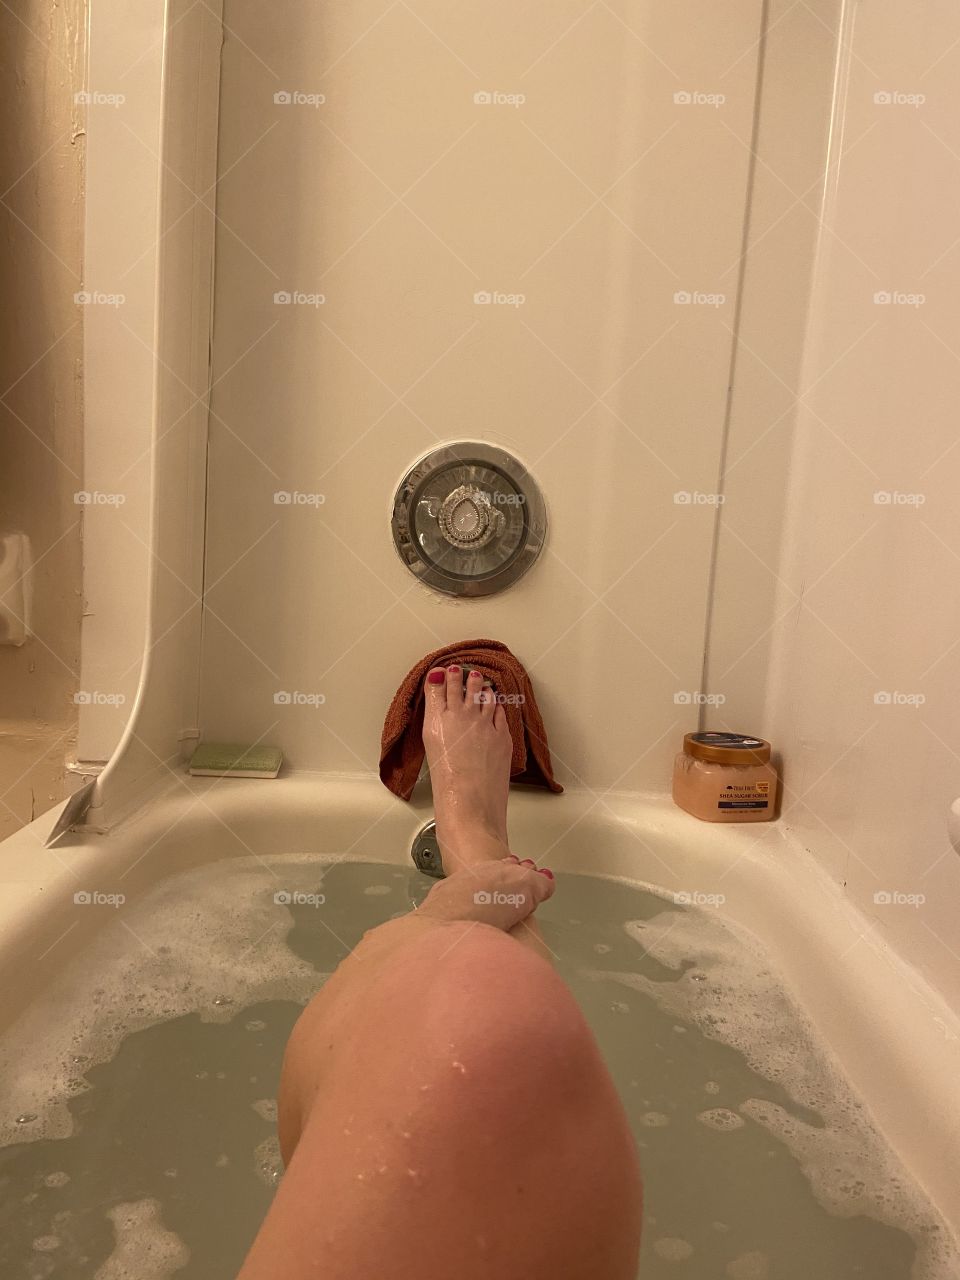 Feet and legs in the tub